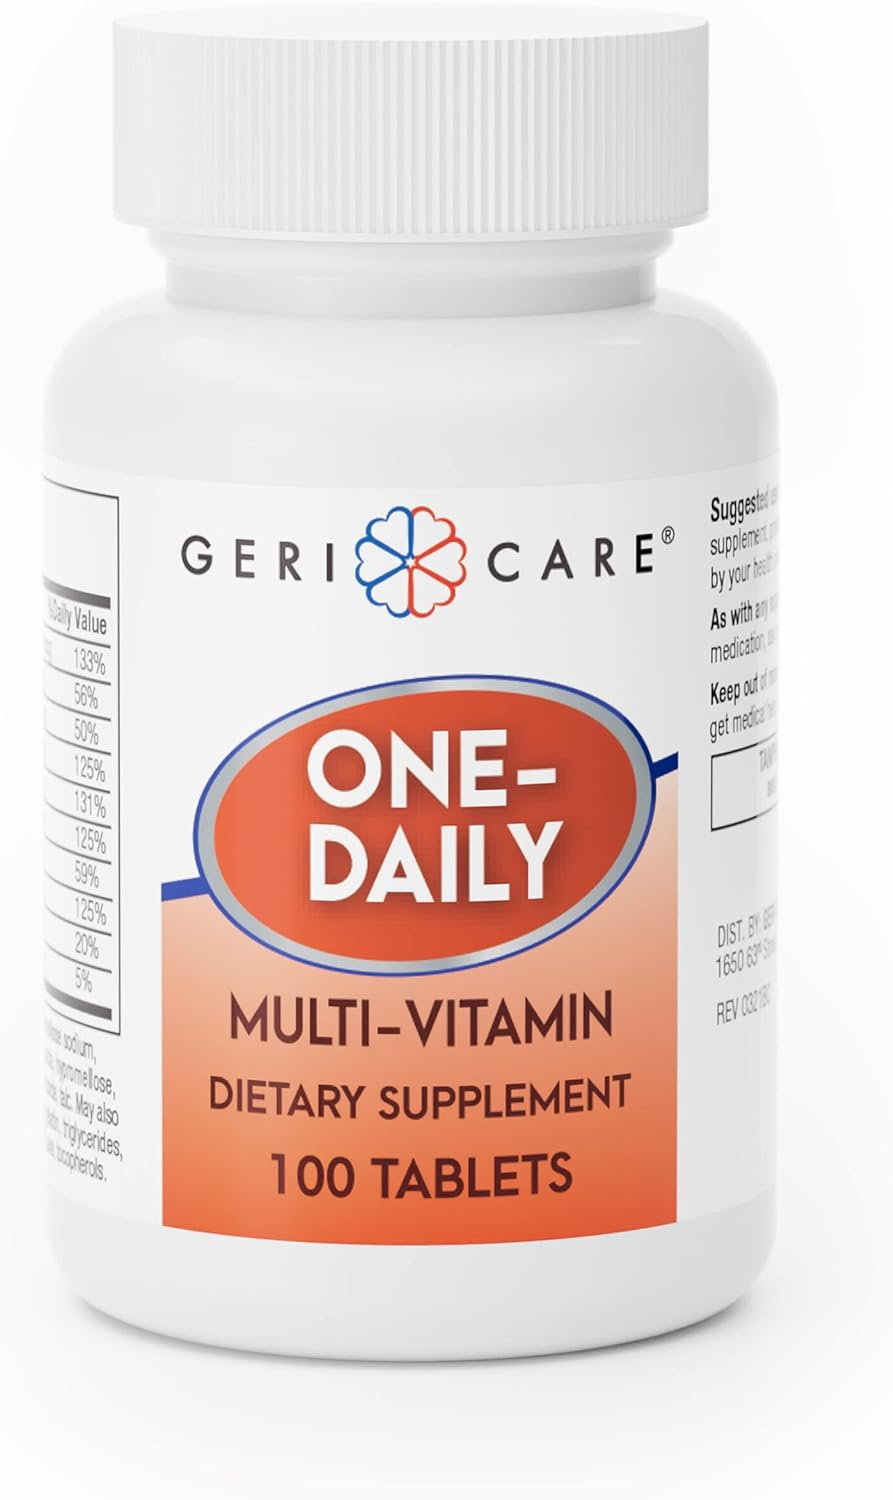 Multivitamin One-Daily Tablets 100 Per Bottle by Geri-Care Pharmaceuticals